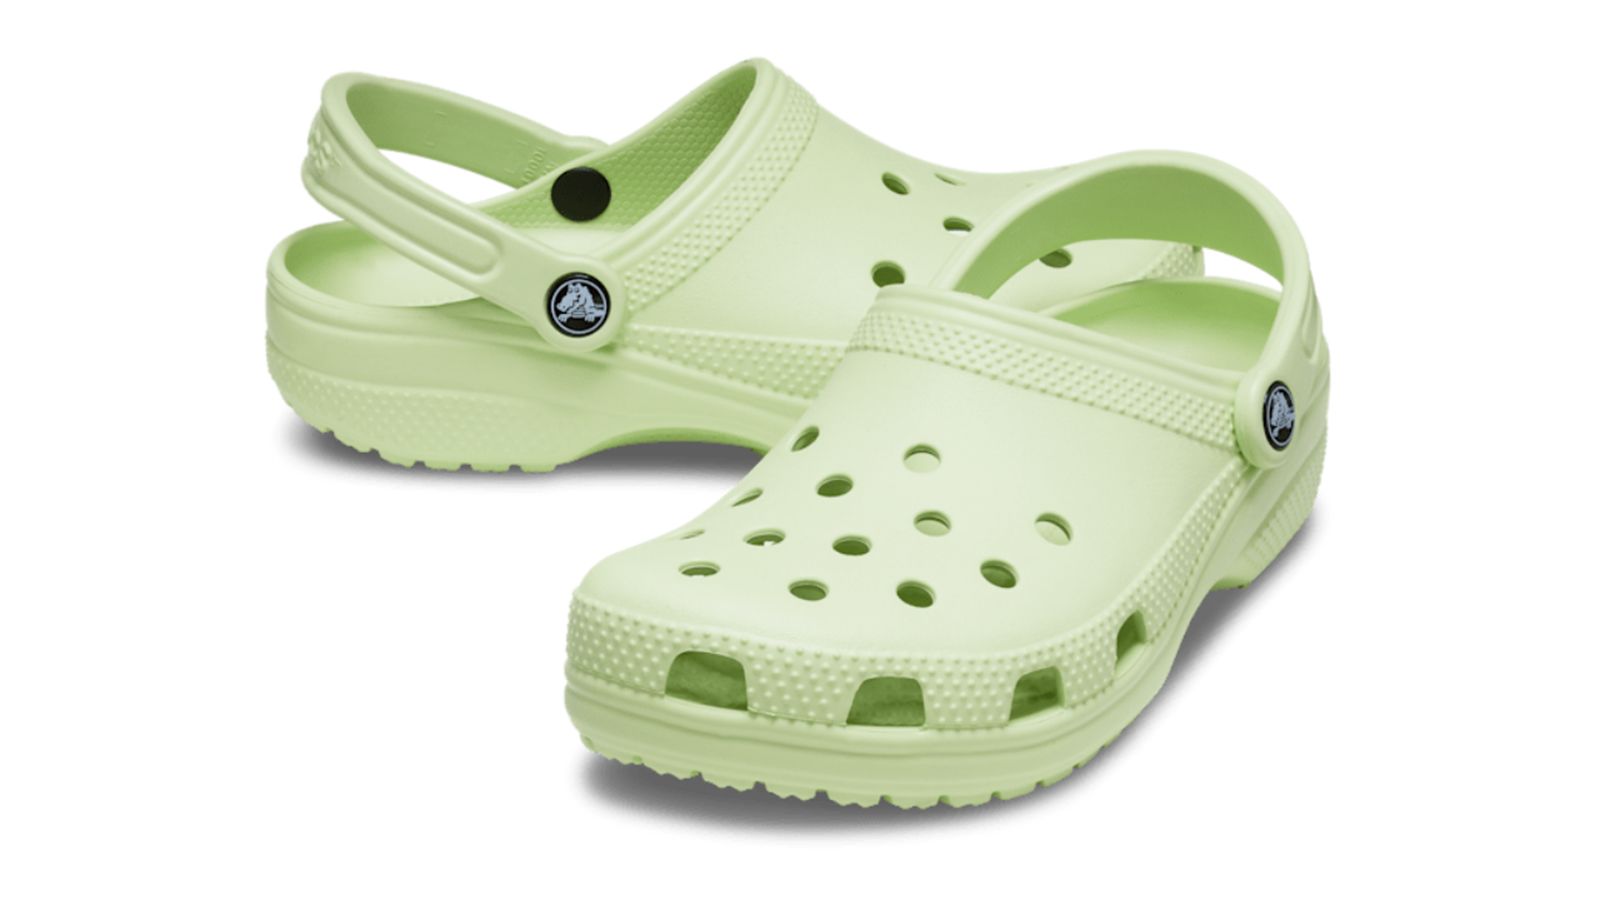 Crocs releases new colors to beat the winter blues | CNN Underscored